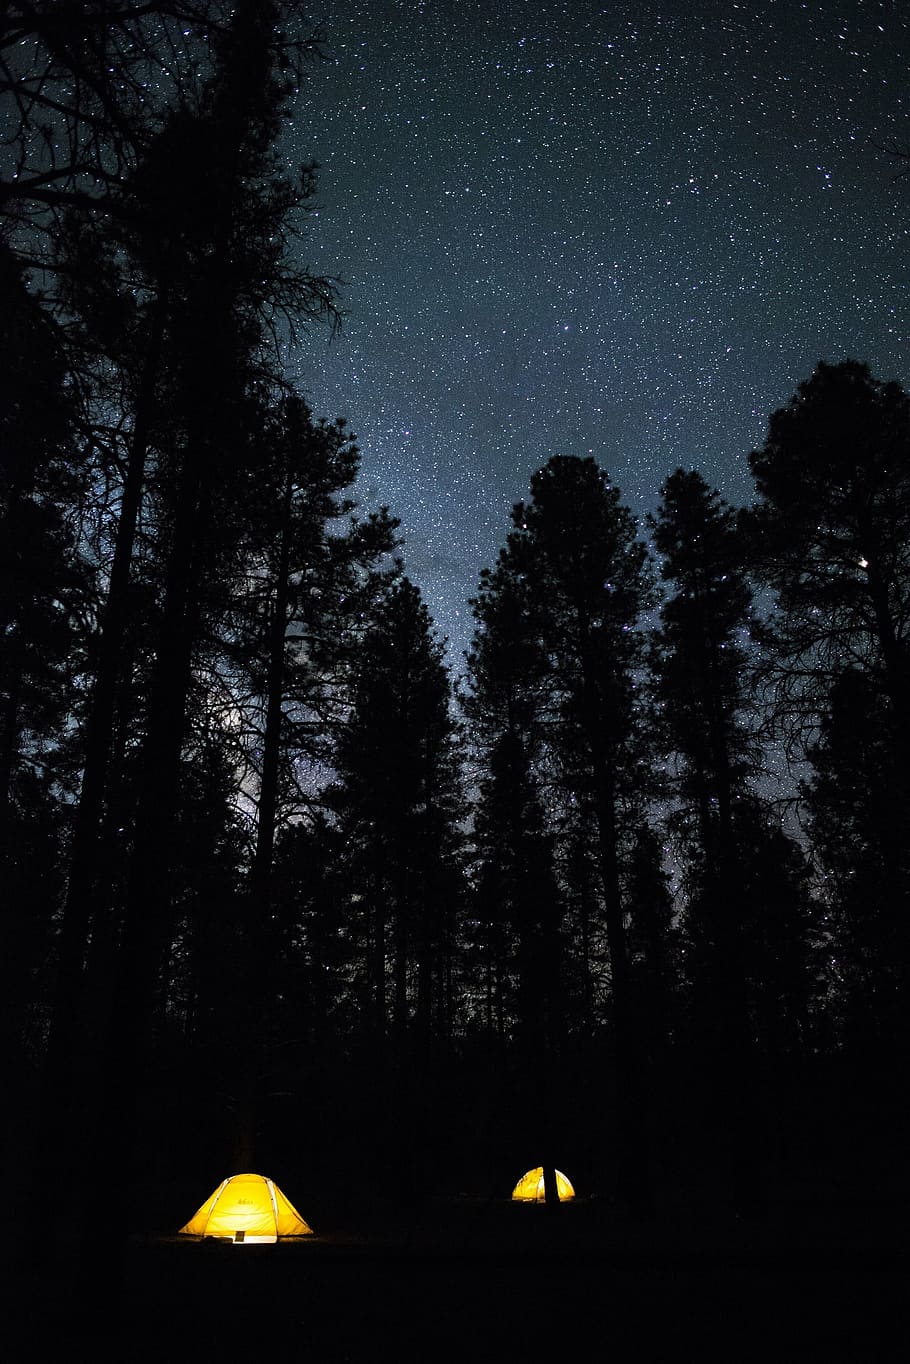 shallow, focus photography, tree, night time, camping, night, tents, recreation, lifestyle, fun